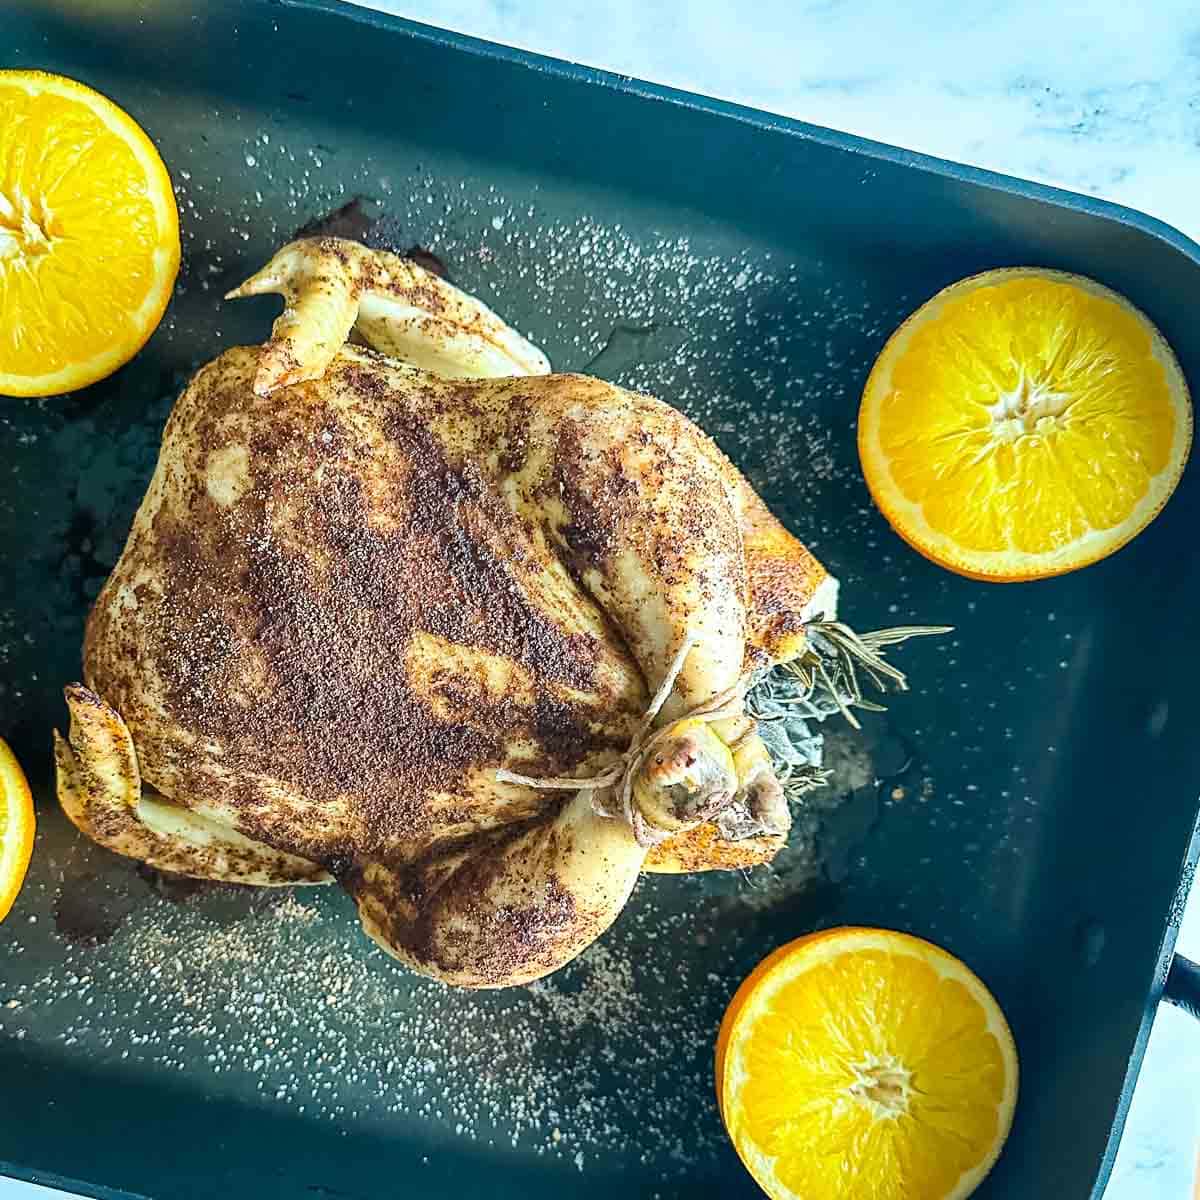 A half-cooked Christmas Roast Chicken in a roasting pan with halved oranges.